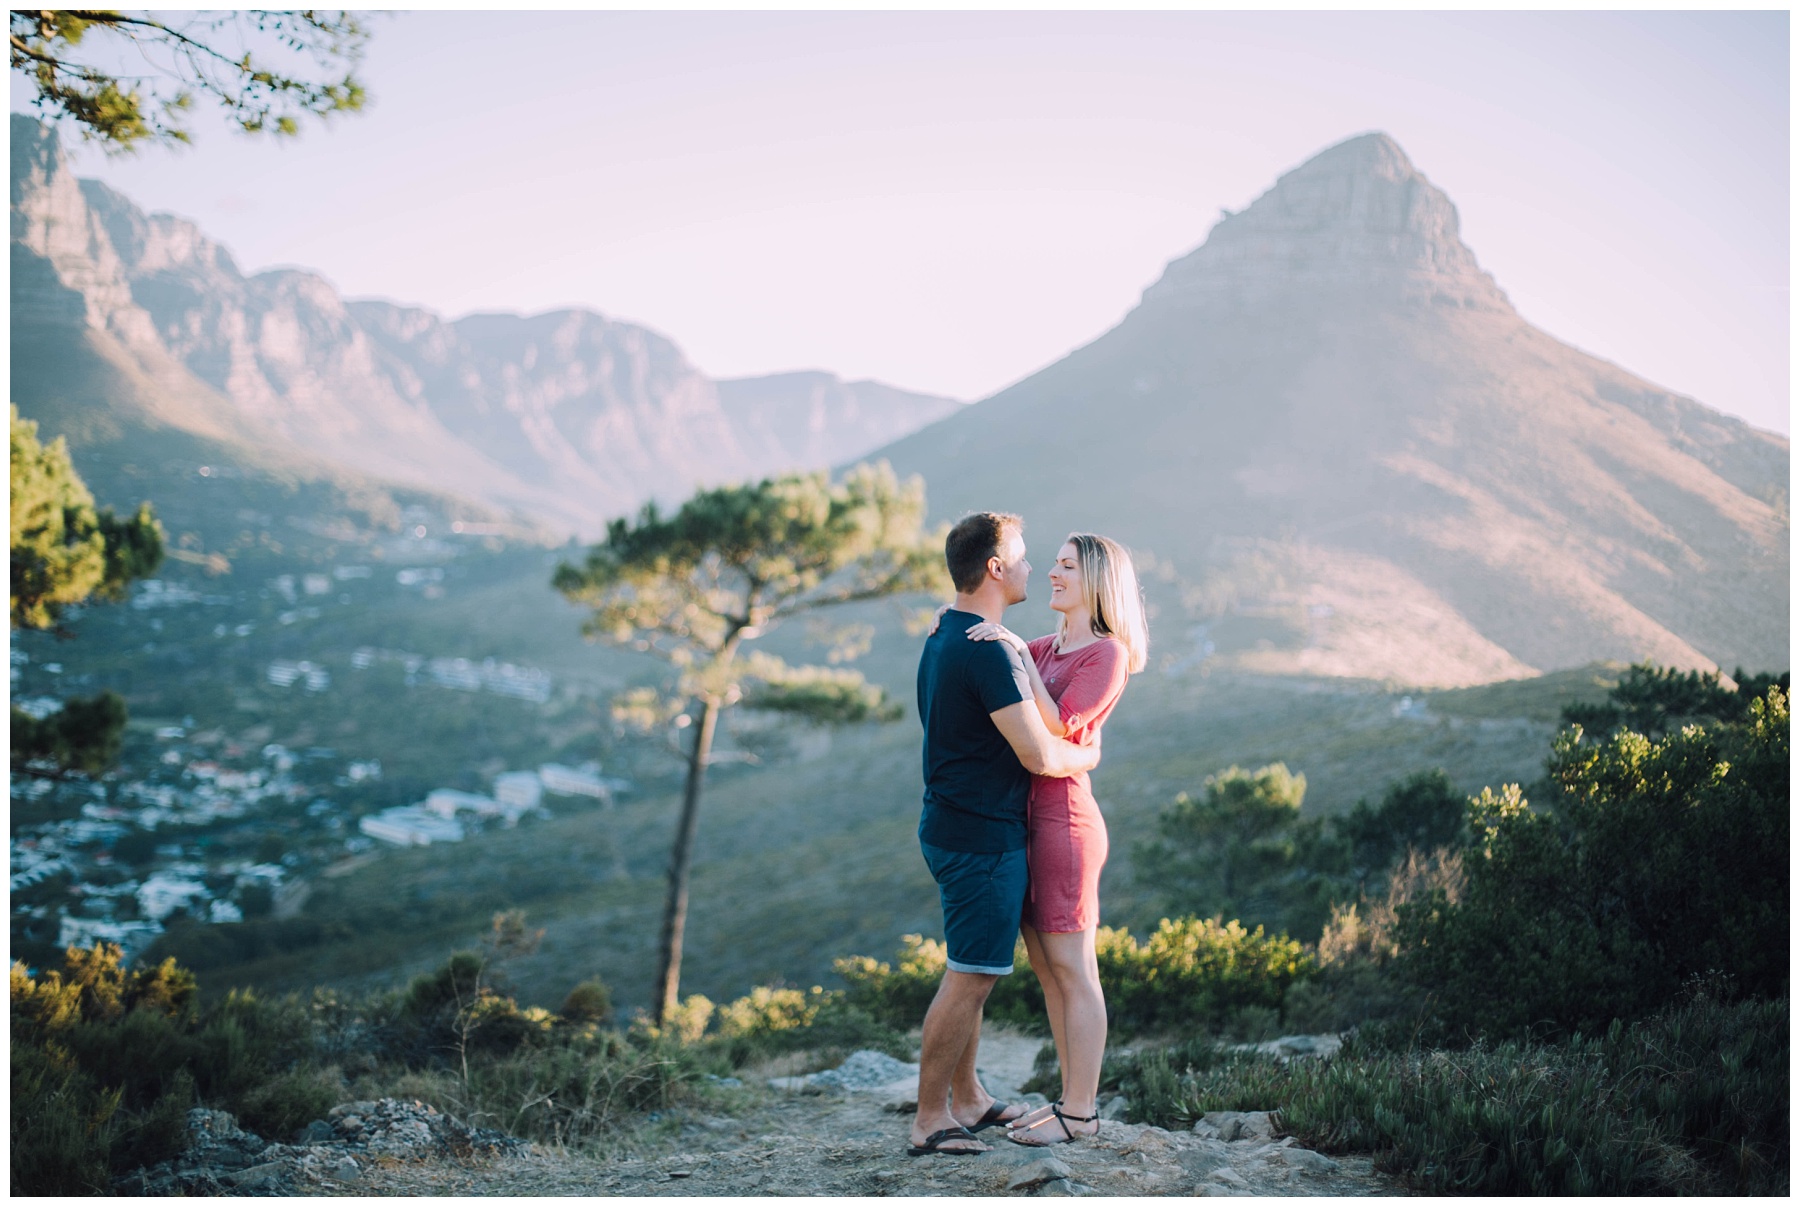 Ronel Kruger Cape Town Wedding and Lifestyle Photographer_2115.jpg